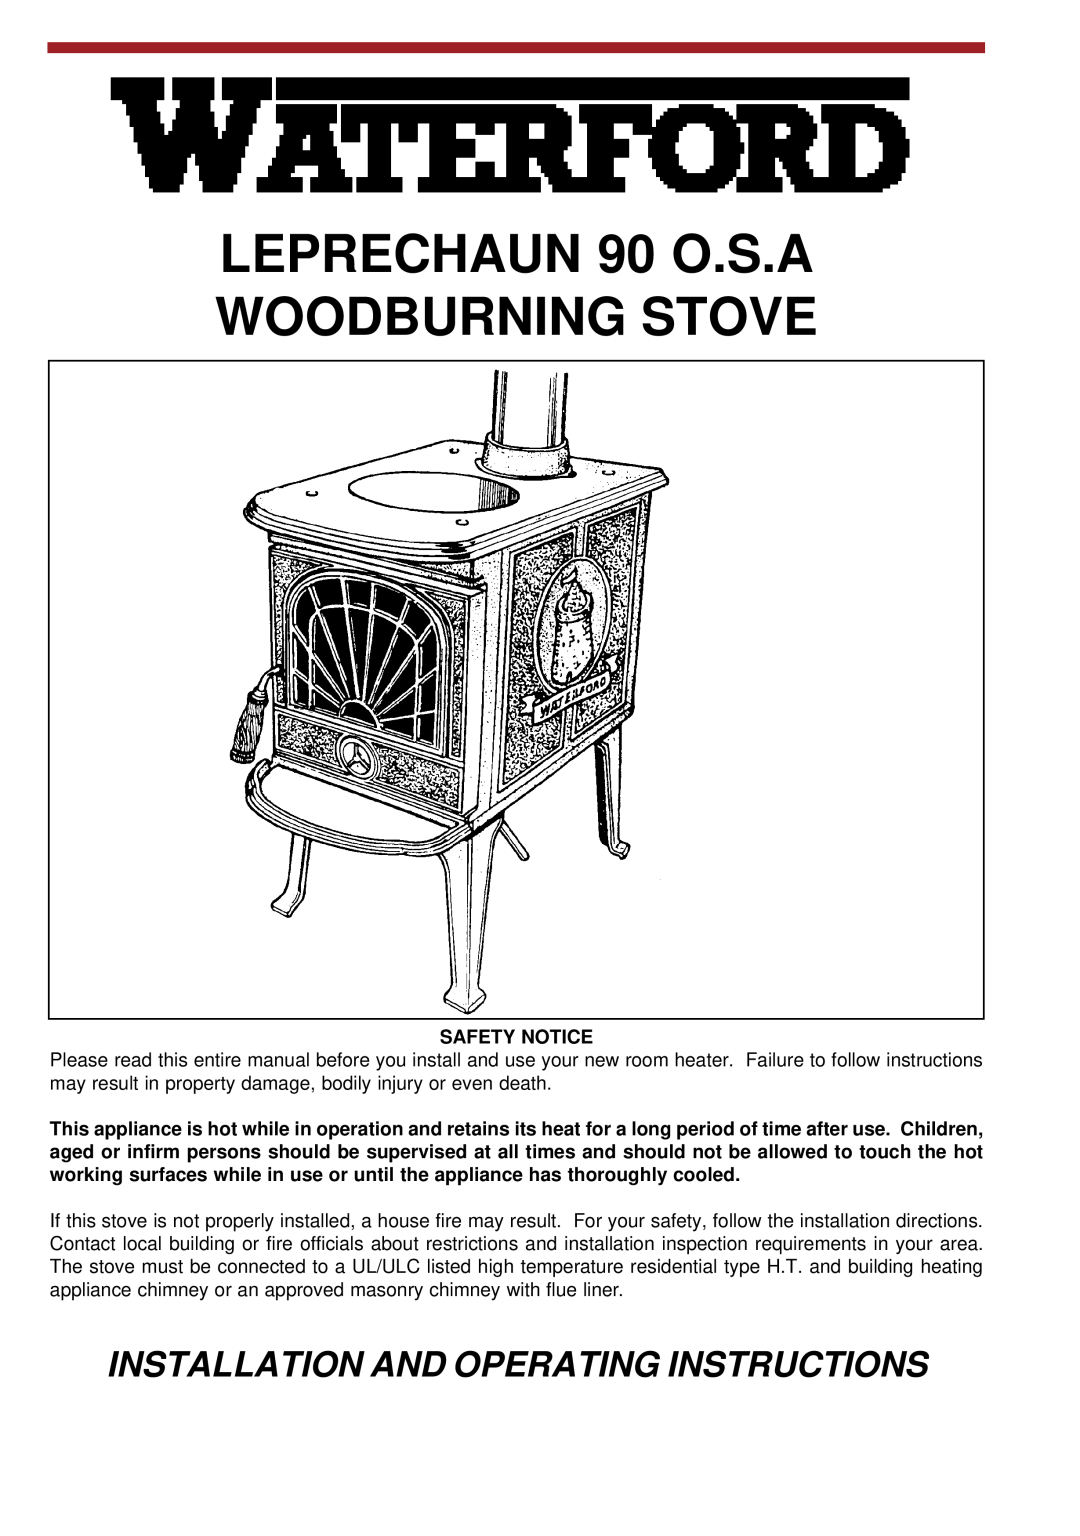 Waterford Appliances operating instructions LEPRECHAUN 90 O.S.A WOODBURNING STOVE 